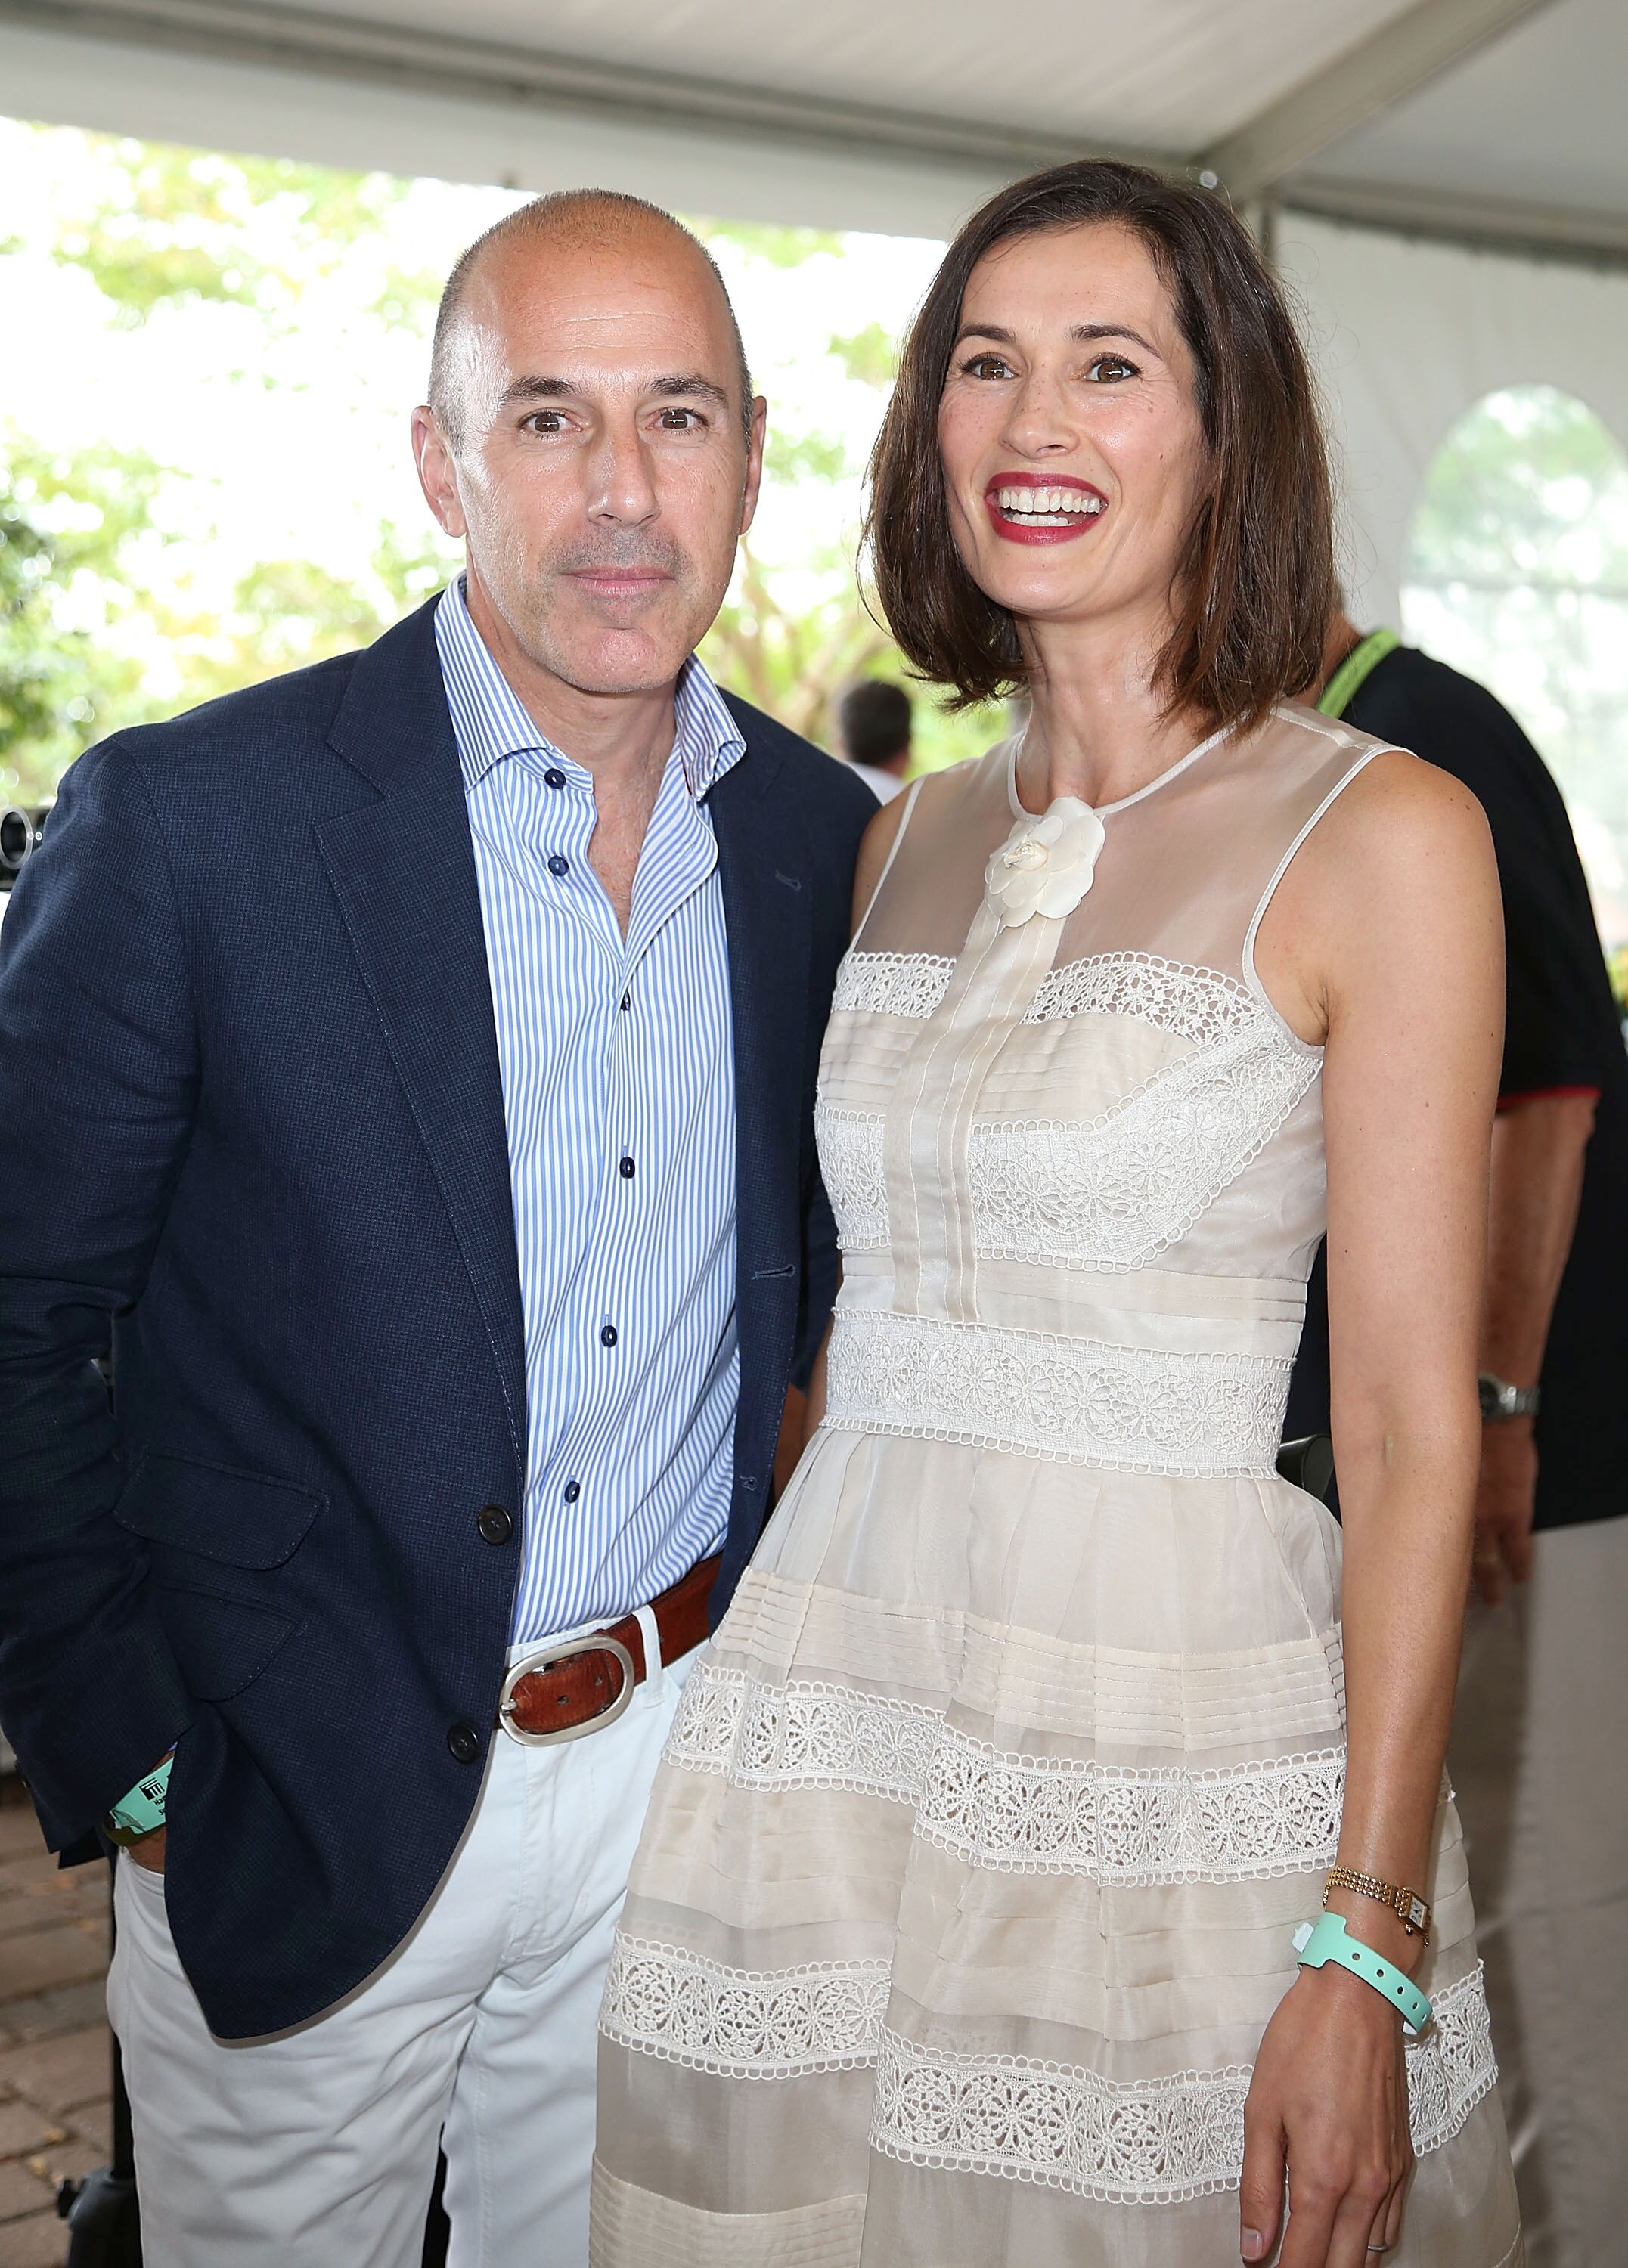 Matt Lauer and wife Annette Roque Lauer at the 38th Annual Hampton Classic Horse Show on September 1, 2013, in Bridgehampton, New York | Photo: Sonia Moskowitz/Getty Images